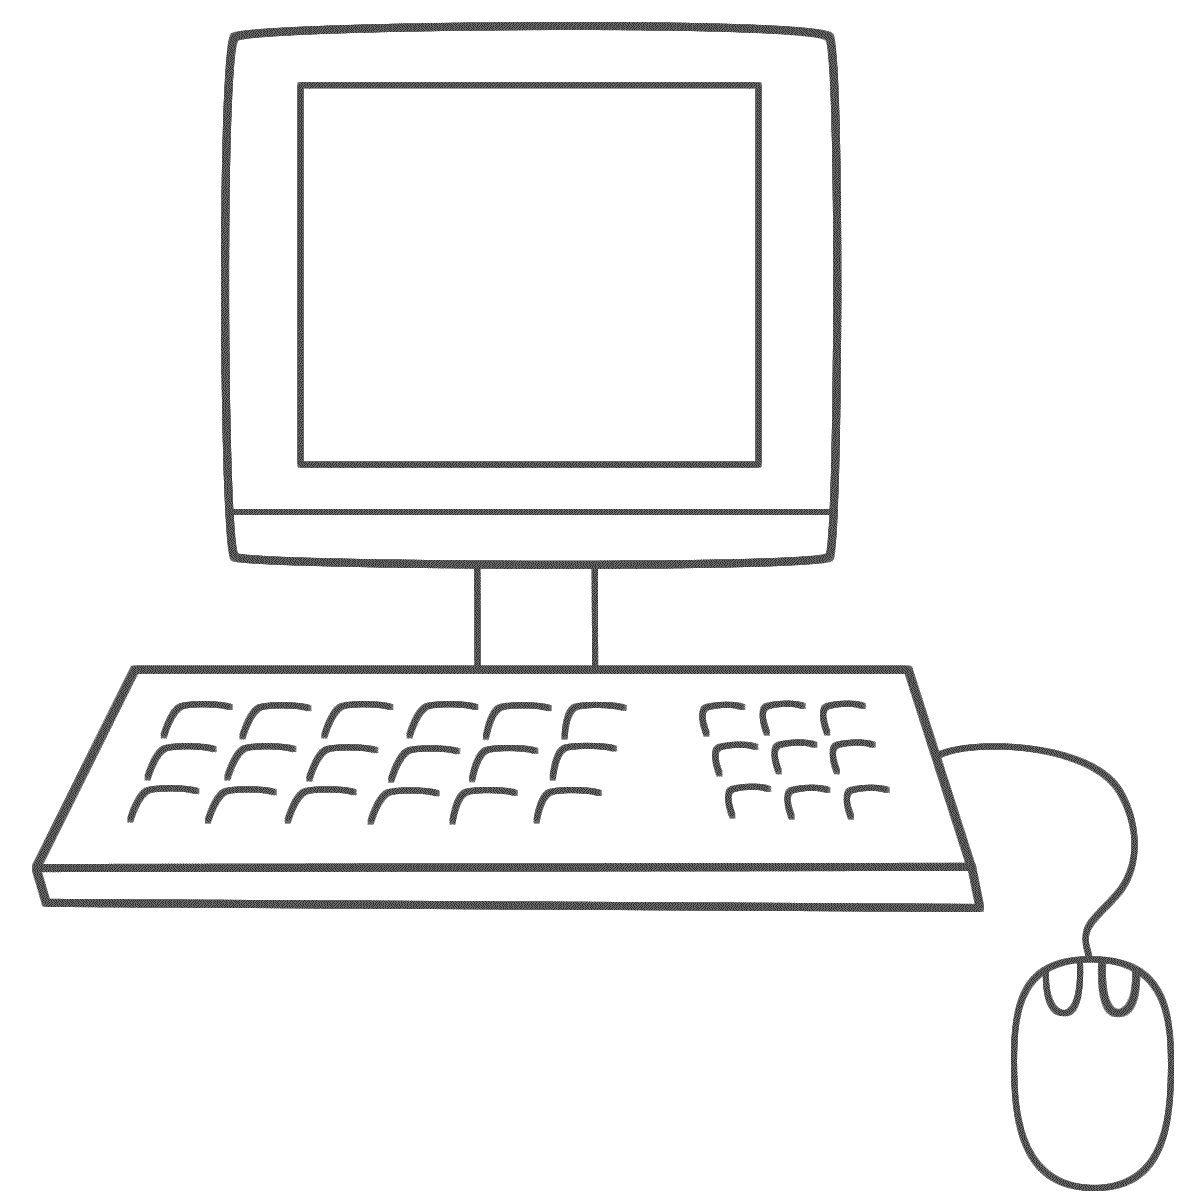 1 computer coloring pages for kids Computer Coloring Pages For ...